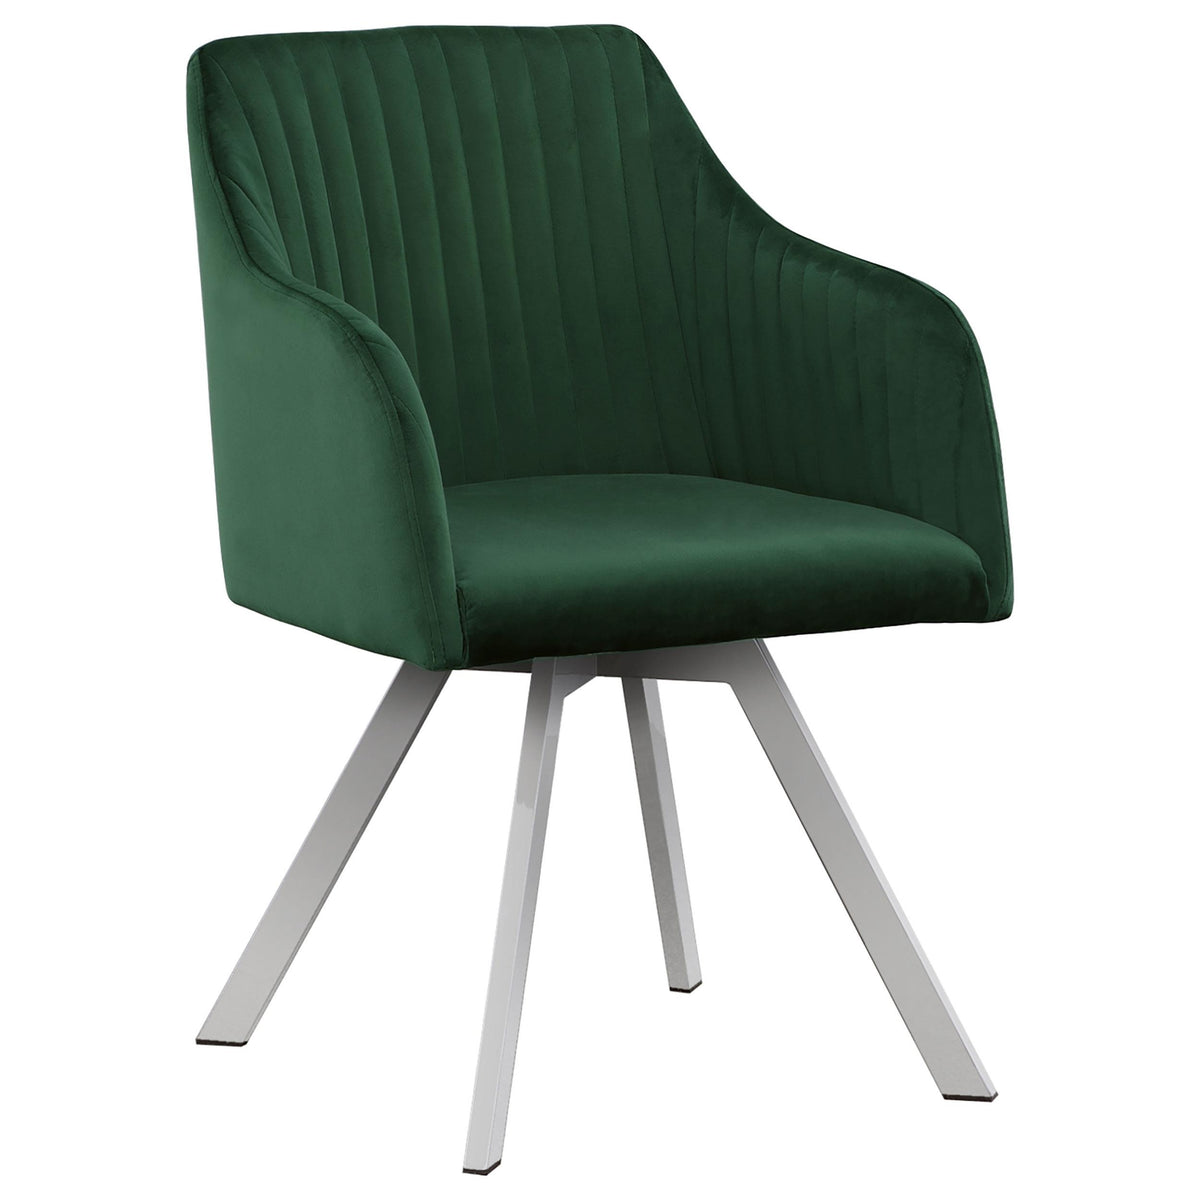 Arika Channeled Back Swivel Dining Chair Green  Las Vegas Furniture Stores